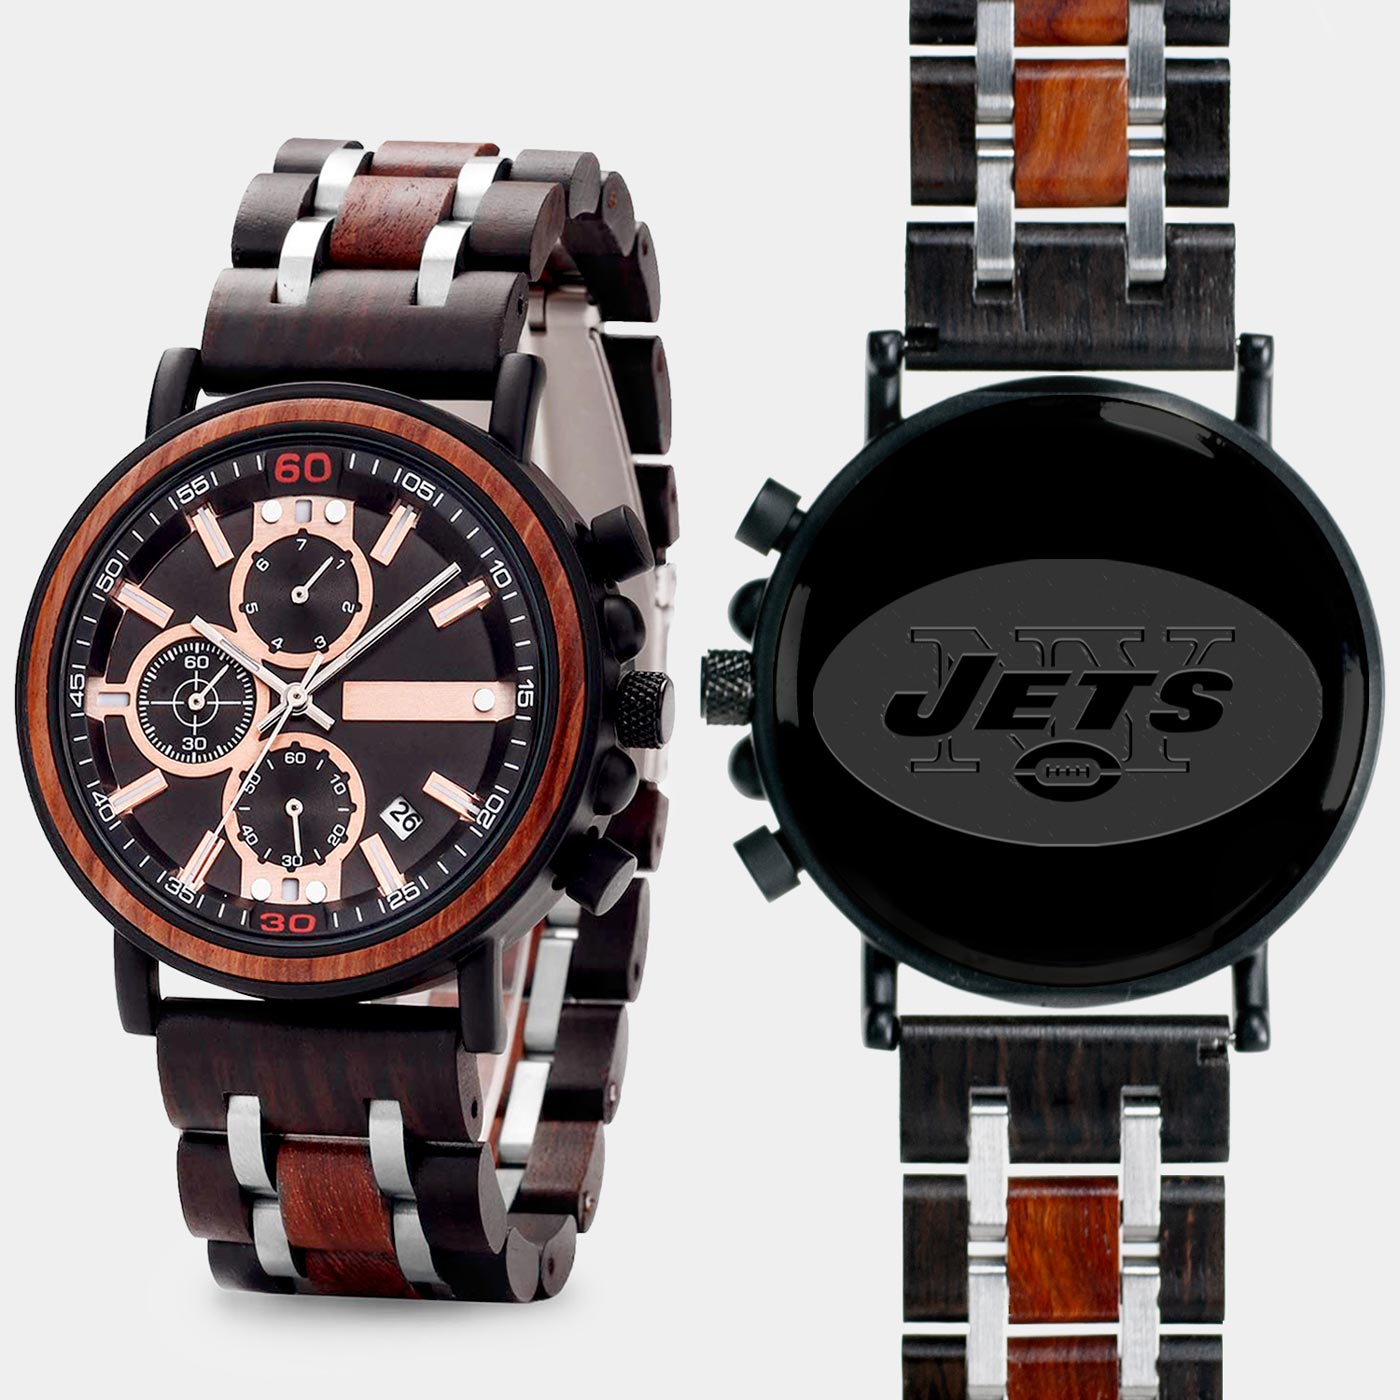 New York Jets Mens Wrist Watch  - Personalized New York Jets Mens Watches - Custom Gifts For Him, Birthday Gifts, Gift For Dad - Best 2022 New York Jets Christmas Gifts - Black 45mm NFL Wood Watch